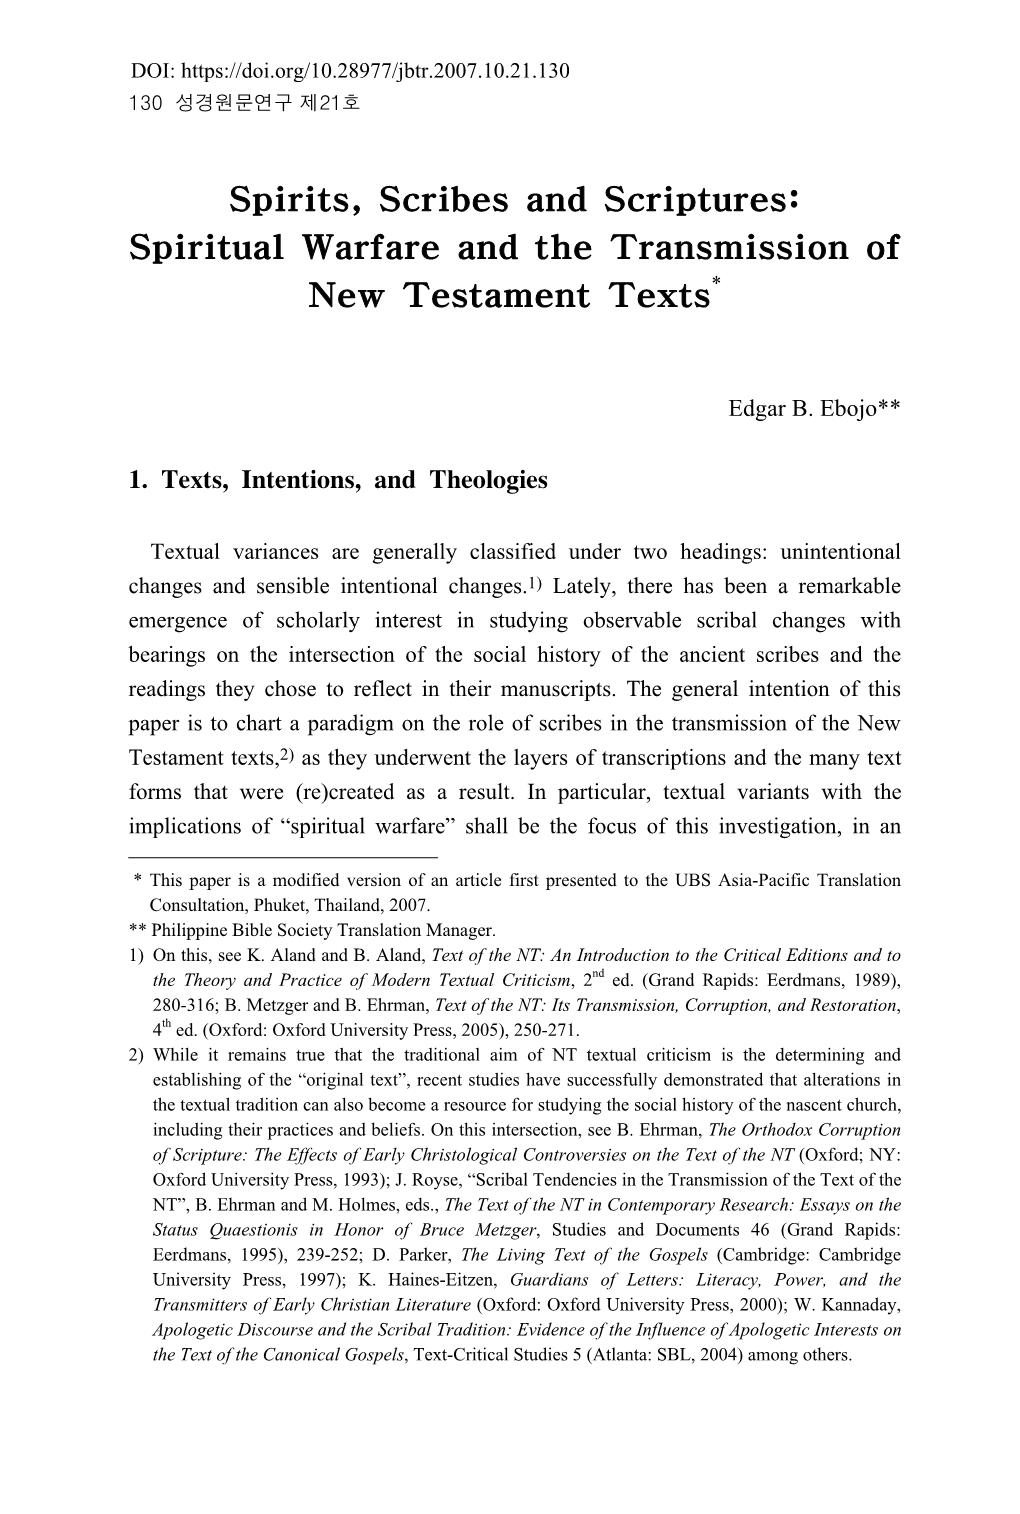 Spirits, Scribes and Scriptures: Spiritual Warfare and the Transmission of New Testament Texts*